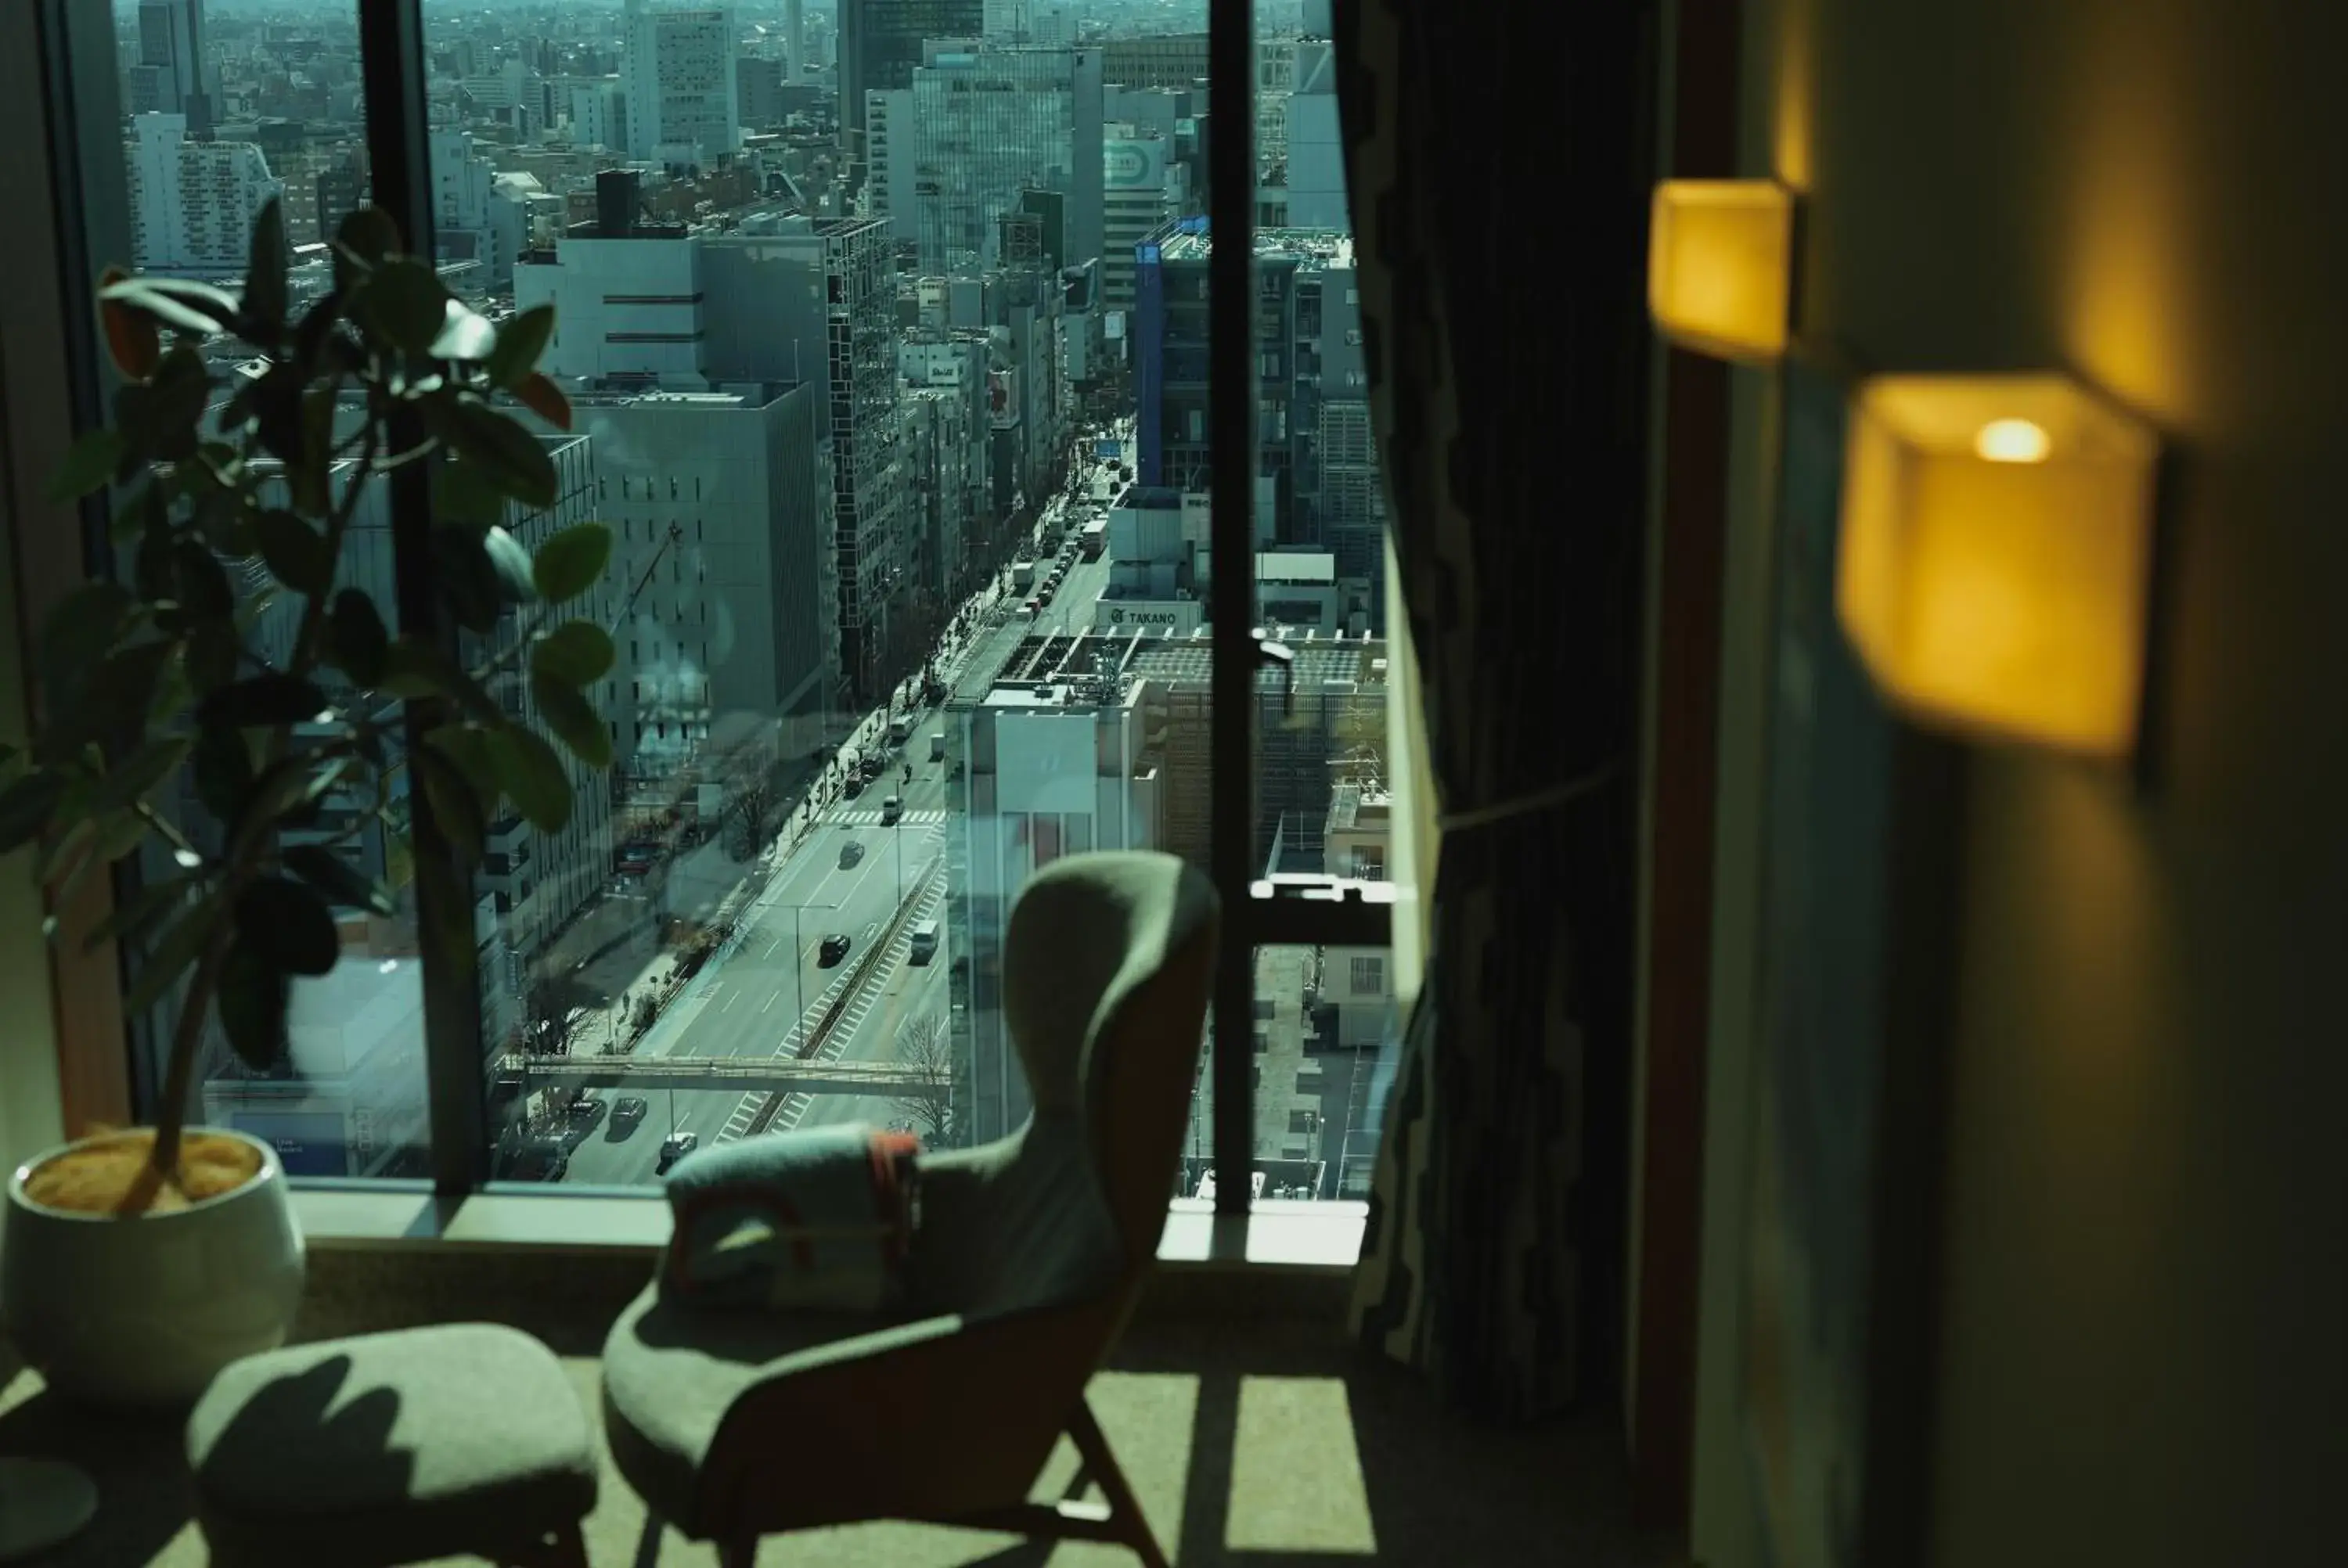 City view in THE AOYAMA GRAND HOTEL